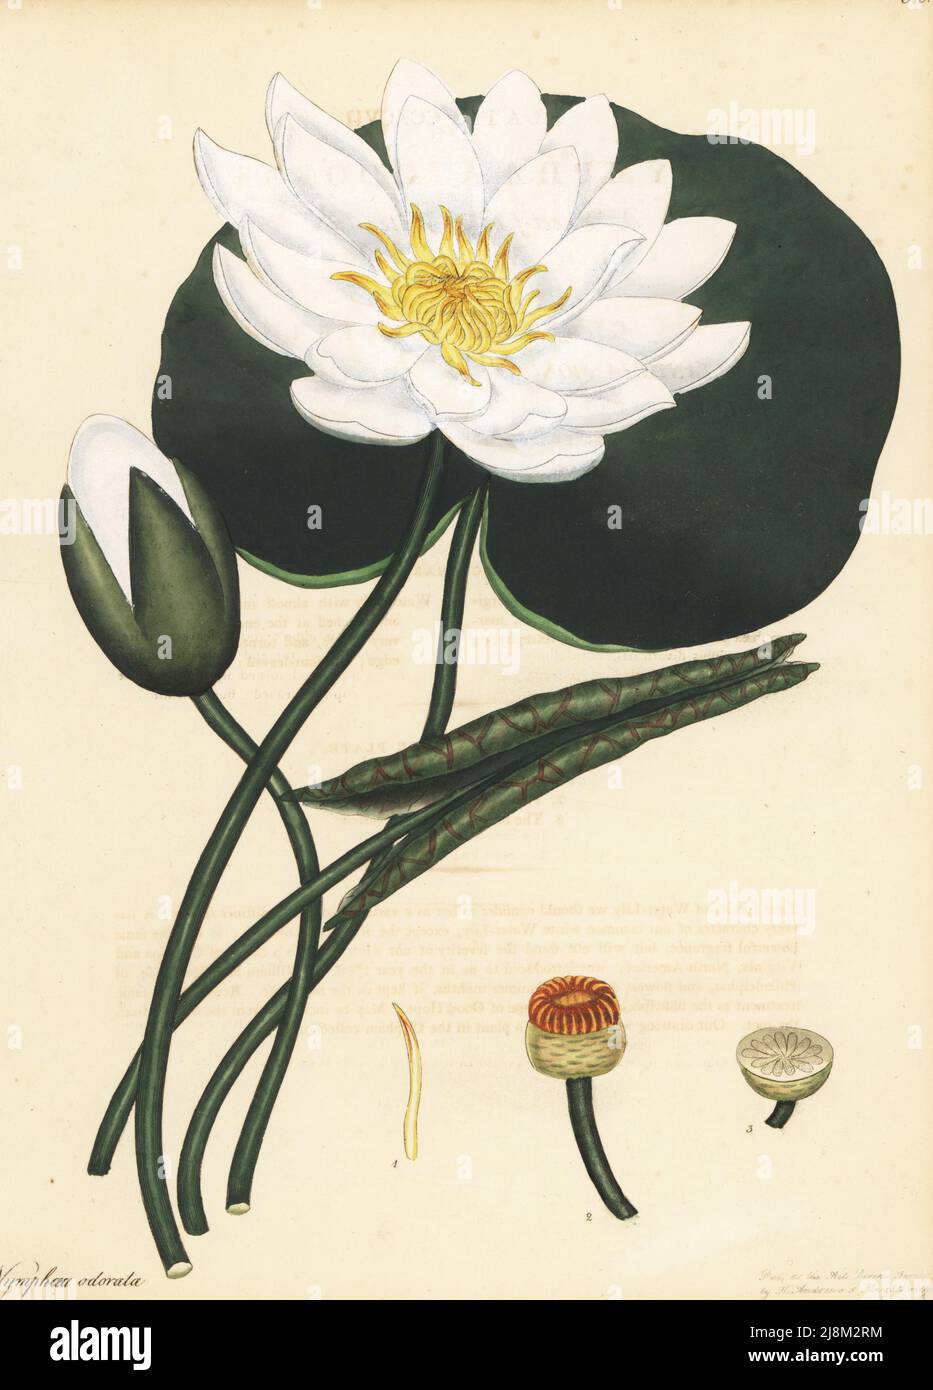 American white waterlily, Nymphaea odorata. Sweet-scented water-lily. From Virginia and Carolina, North America, introduced by William Hamilton of Philadelphia. Copperplate engraving drawn, engraved and hand-coloured by Henry Andrews from his Botanical Register, Volume 5, self-published in Knightsbridge, London, 1803. Stock Photo